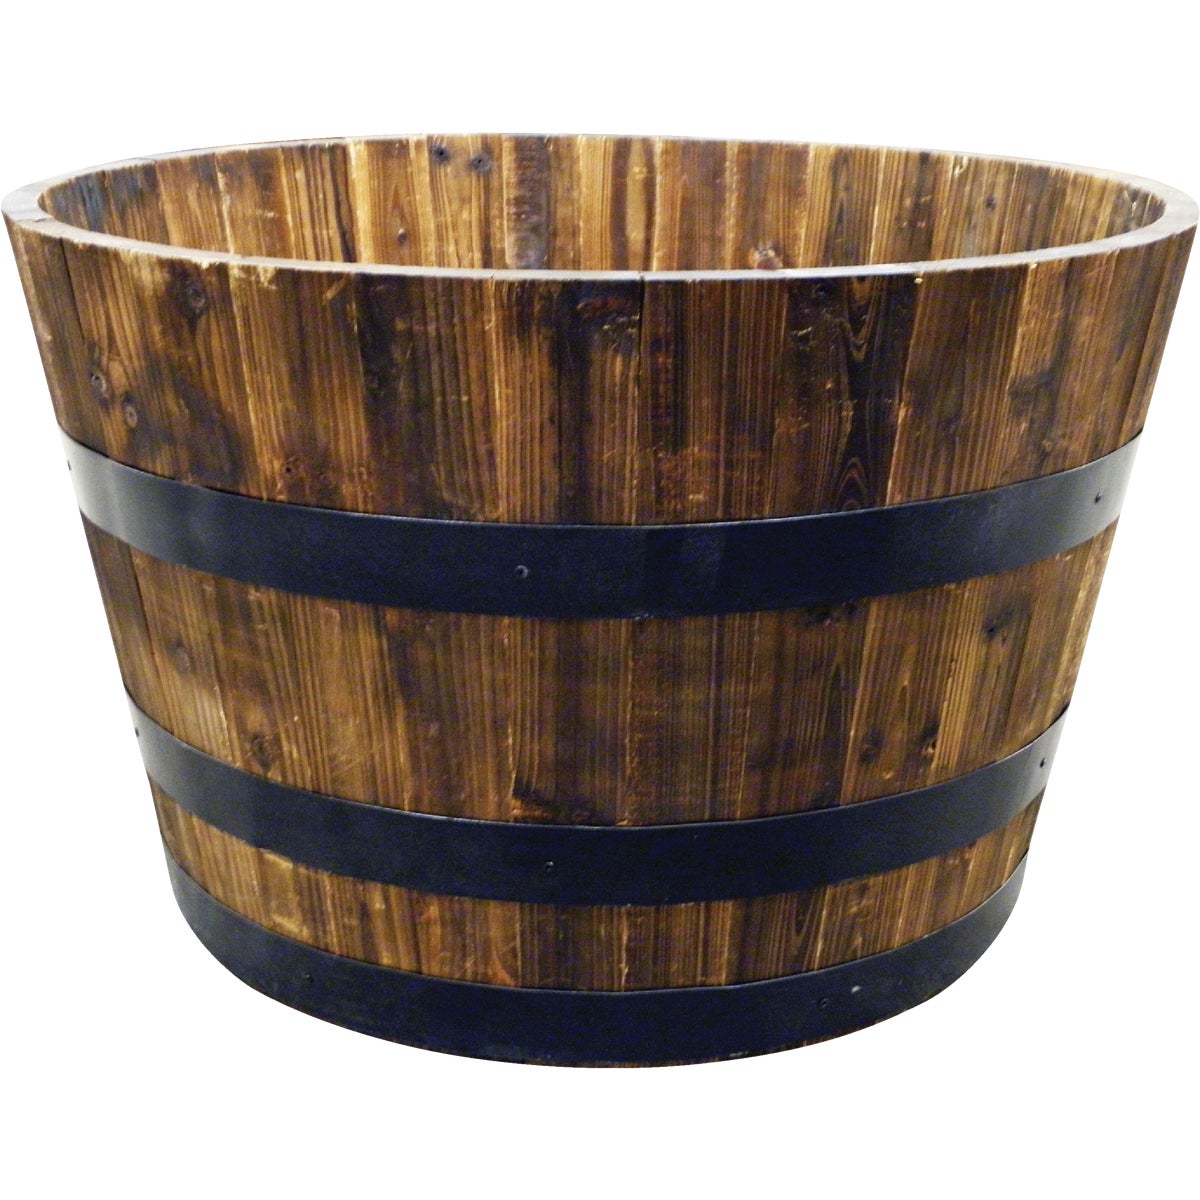 Real Wood Products 26 In. Cedar Whiskey Barrel Planter